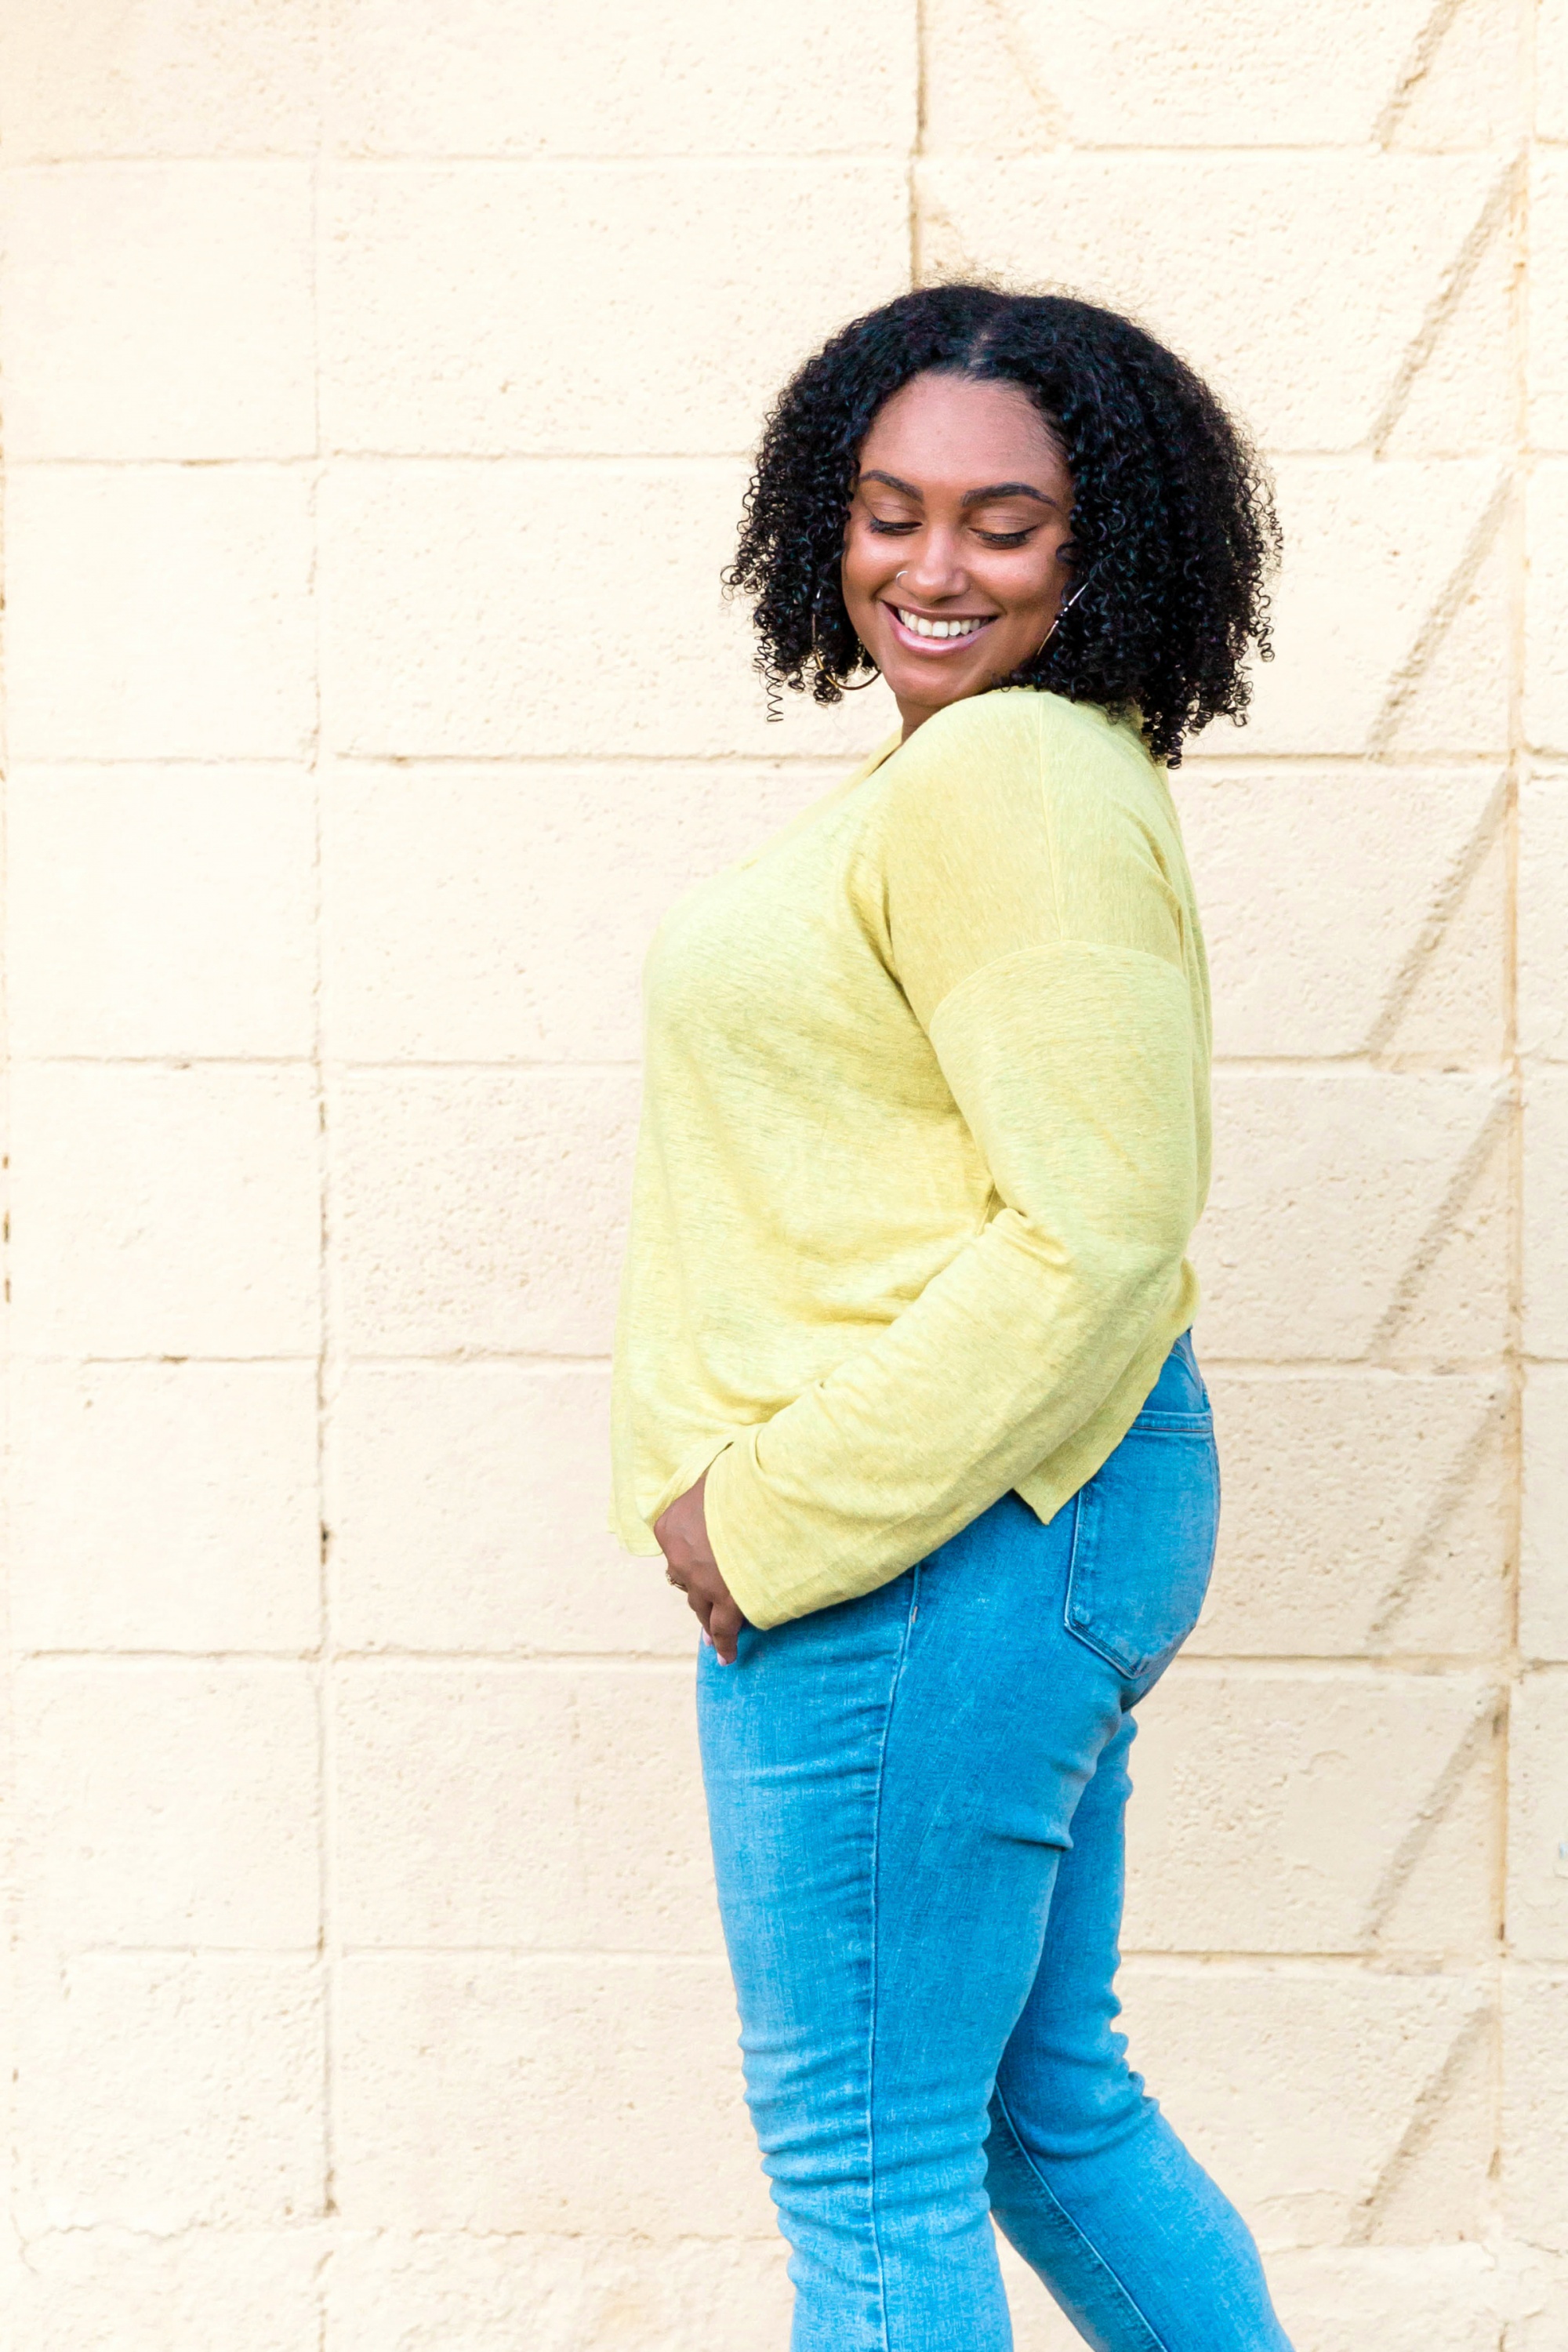 Embrace negative thoughts and turn them into joy, Smiling Black woman with chin-length curls in yellow sweater and jeans